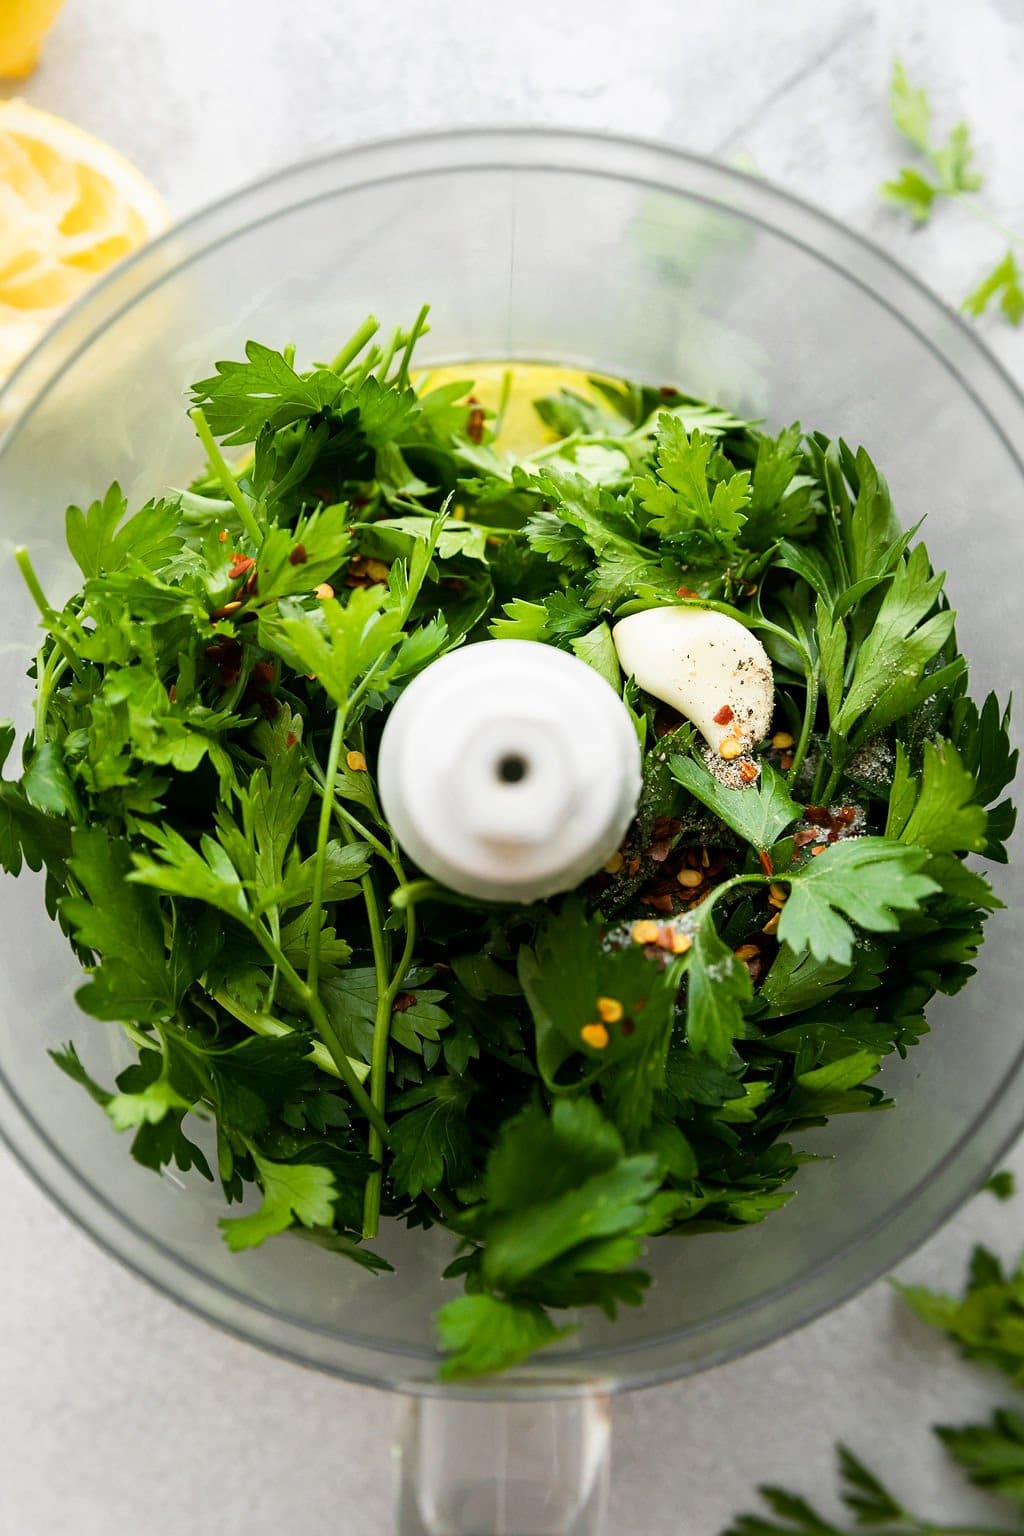 Overhead view food processor bowl filled with greens for chimichurri sauce